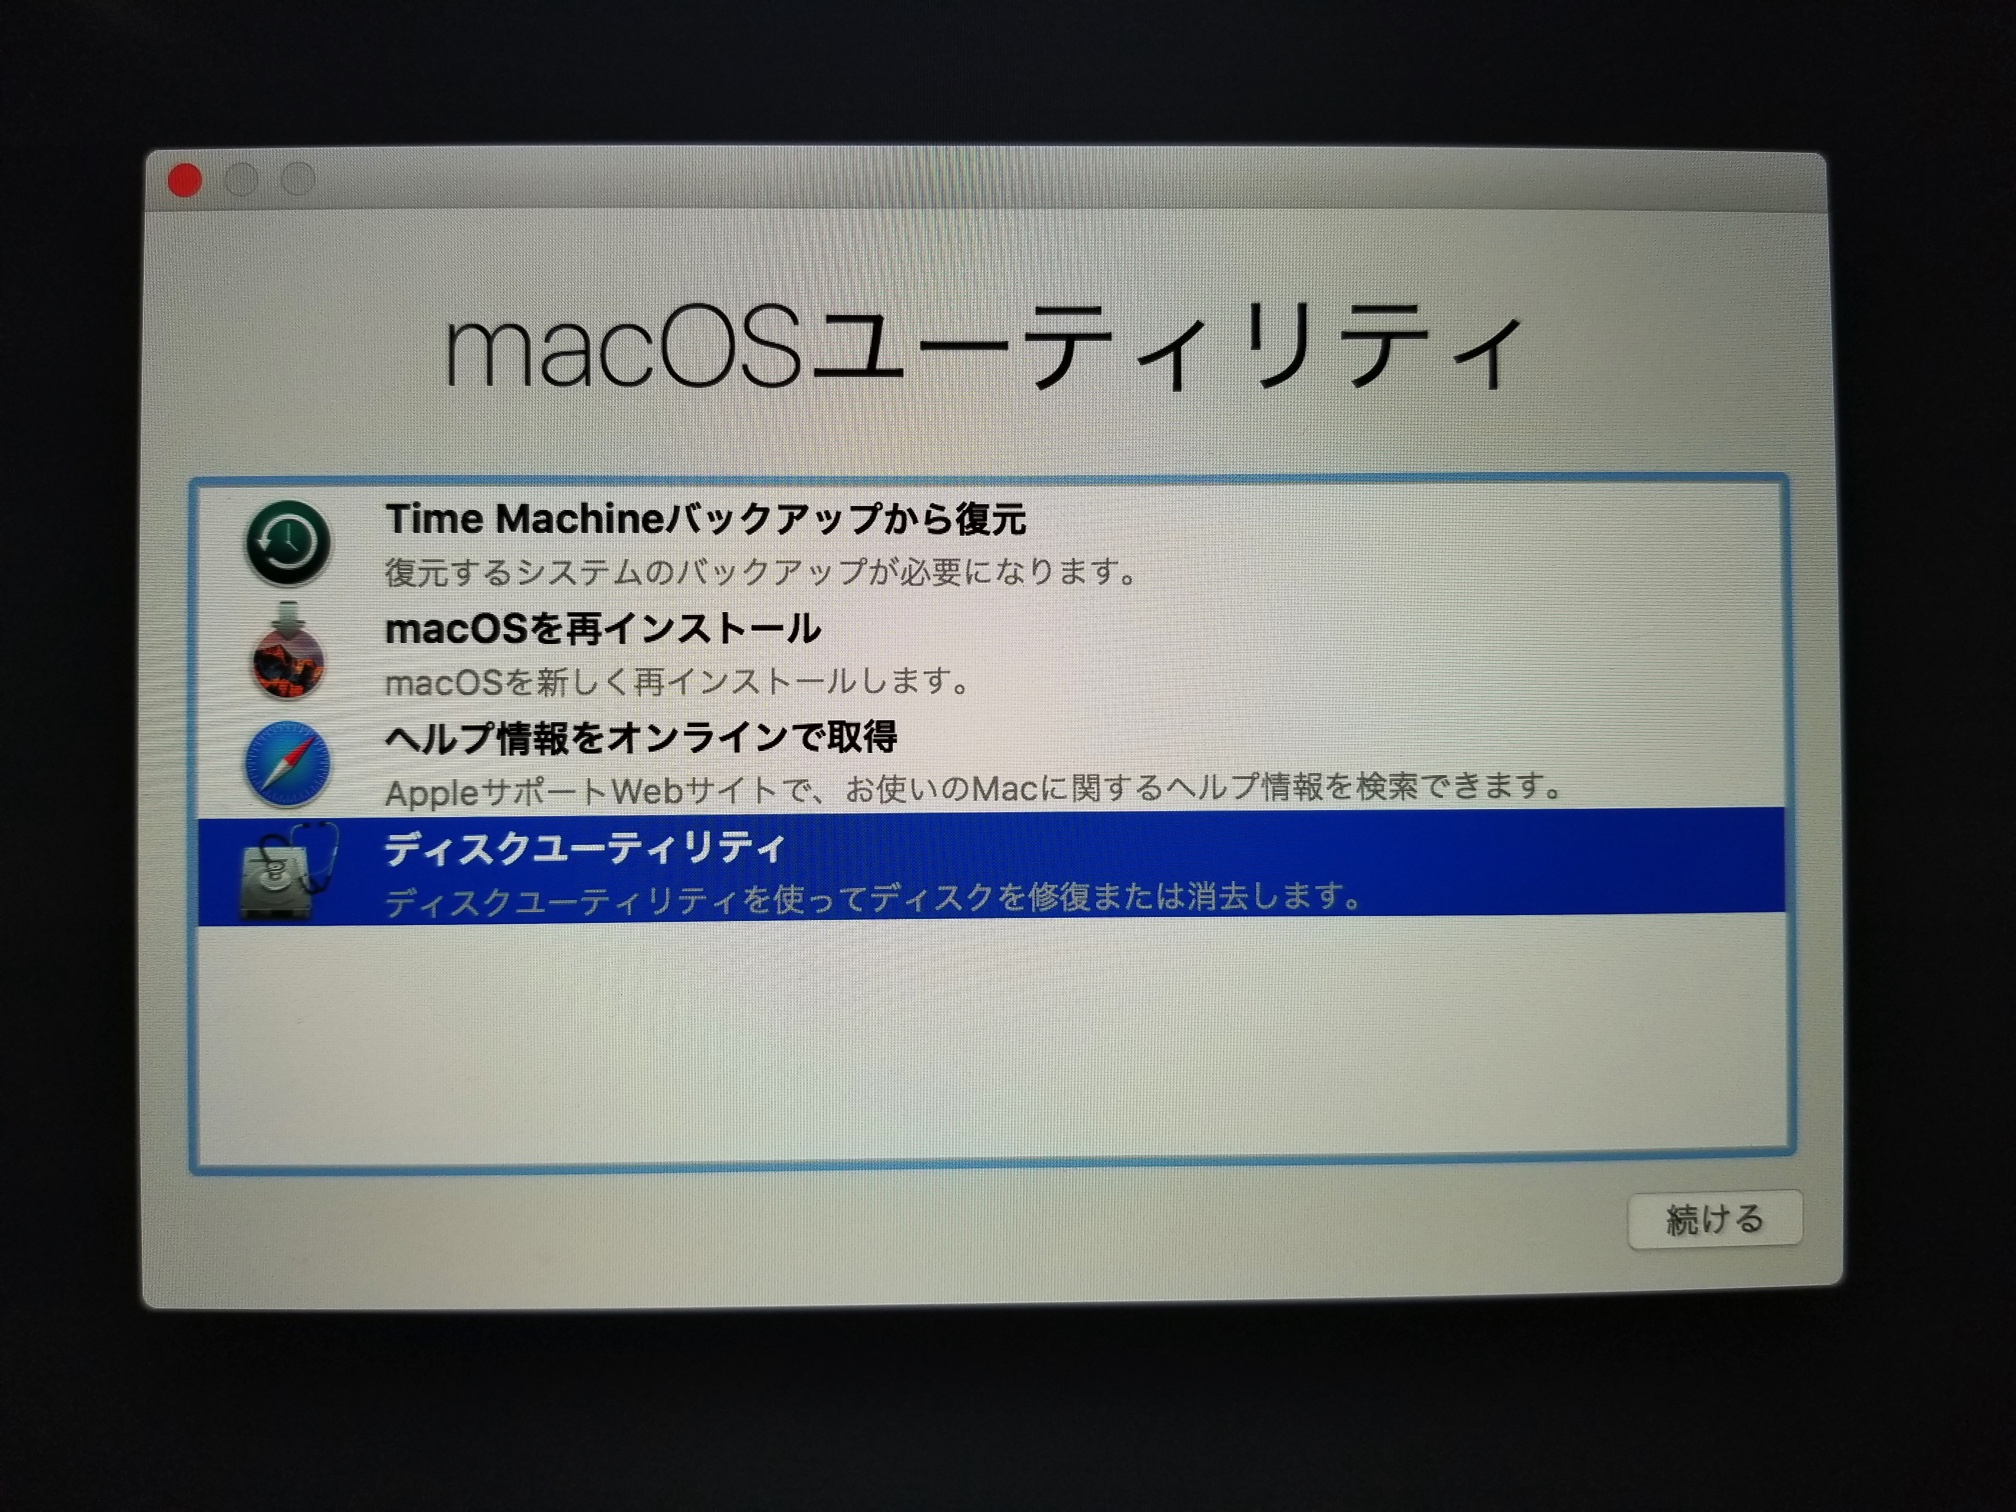 macOS Sierraをクリーンインストール＆Time Machineバックアップから復元してみた | Time to live forever